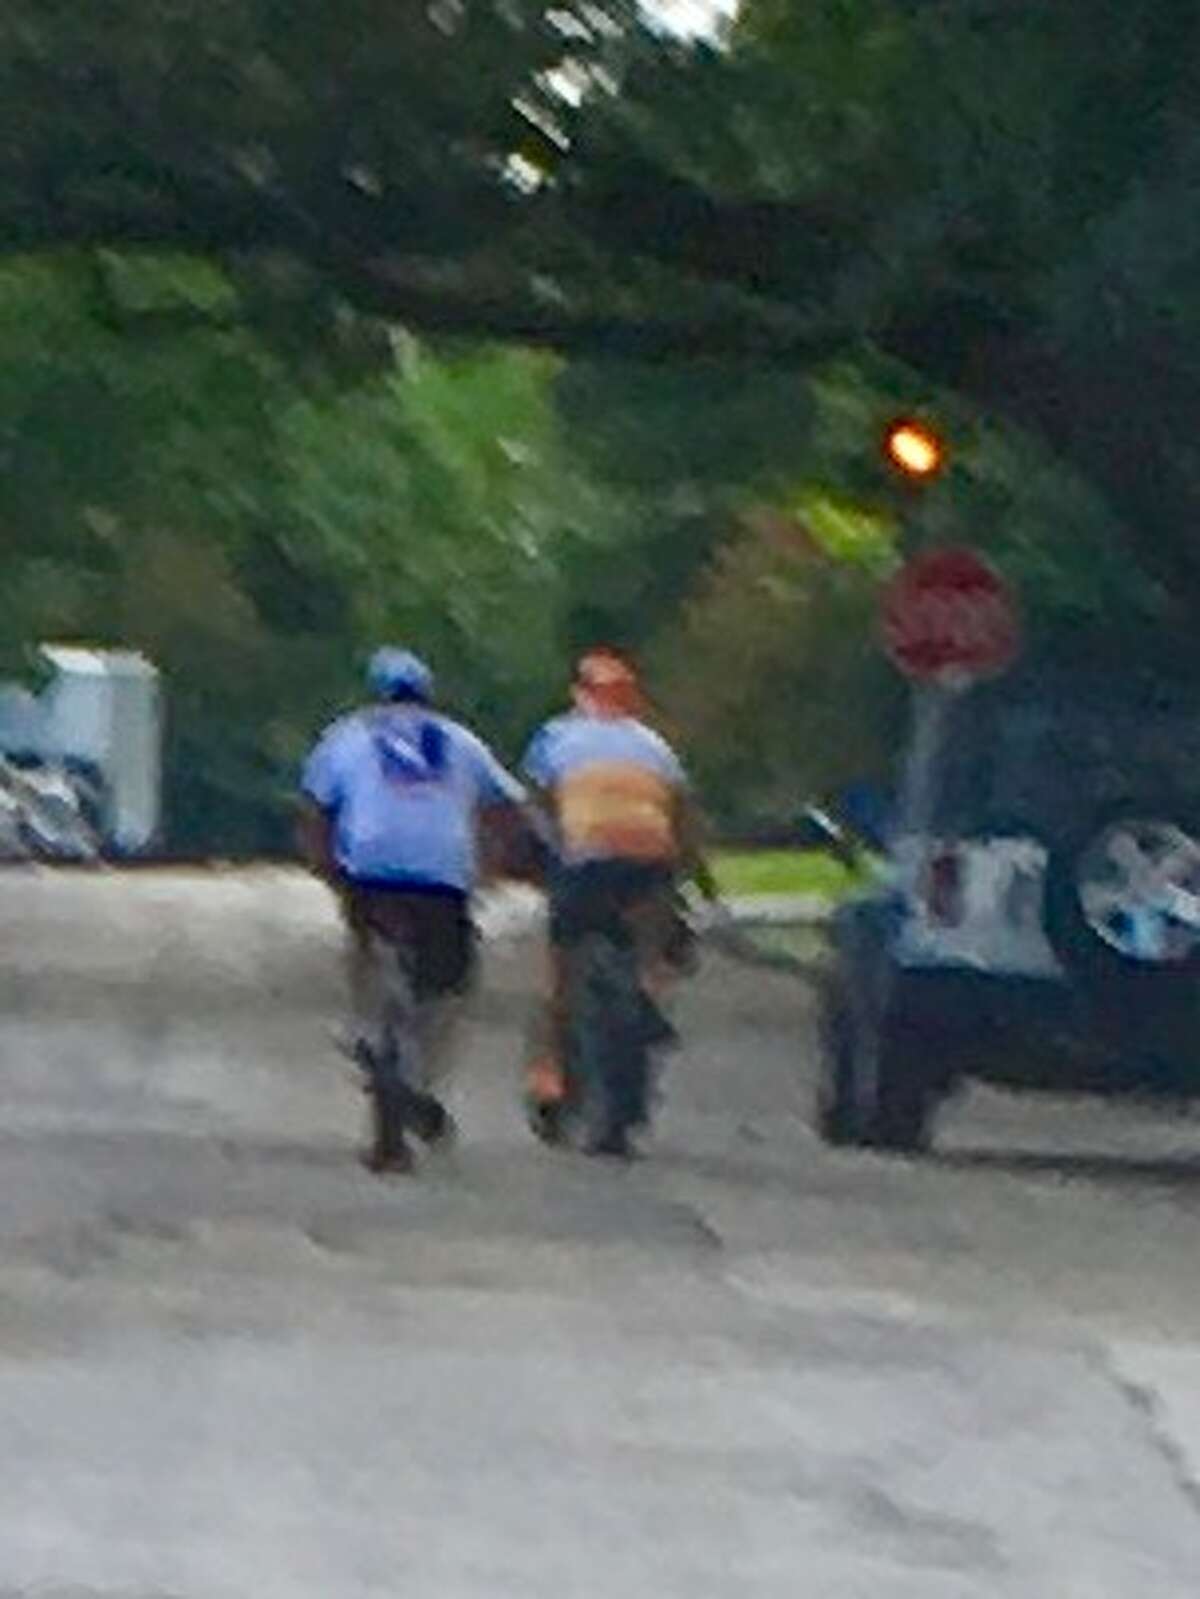 The Harris County Pct. 1 Constable's Office is looking for information on the cyclists shown in this photo, after an assault victim says the cyclist on the right in the orange and yellow Astros jersey attacked him through a car window on July 19. 